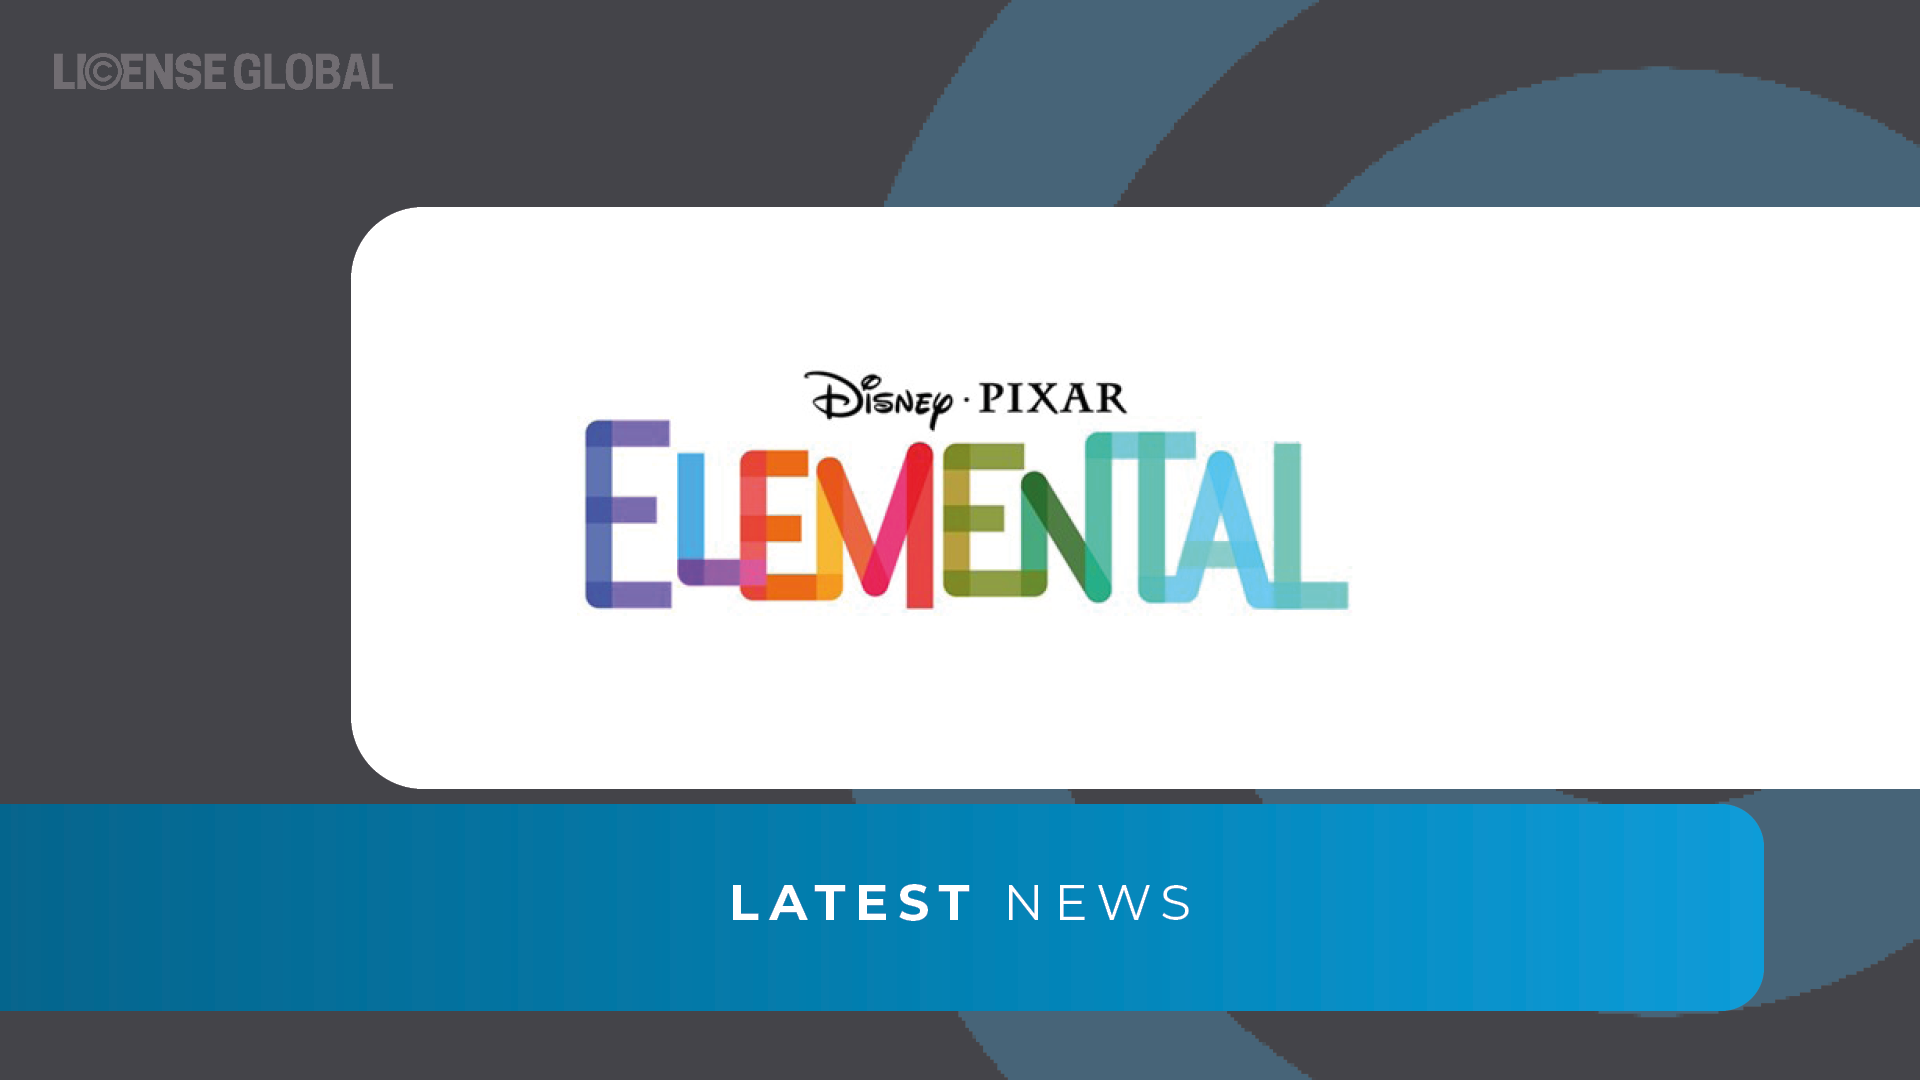 Elemental' Kids' Books to Coincide with New Disney/Pixar Release